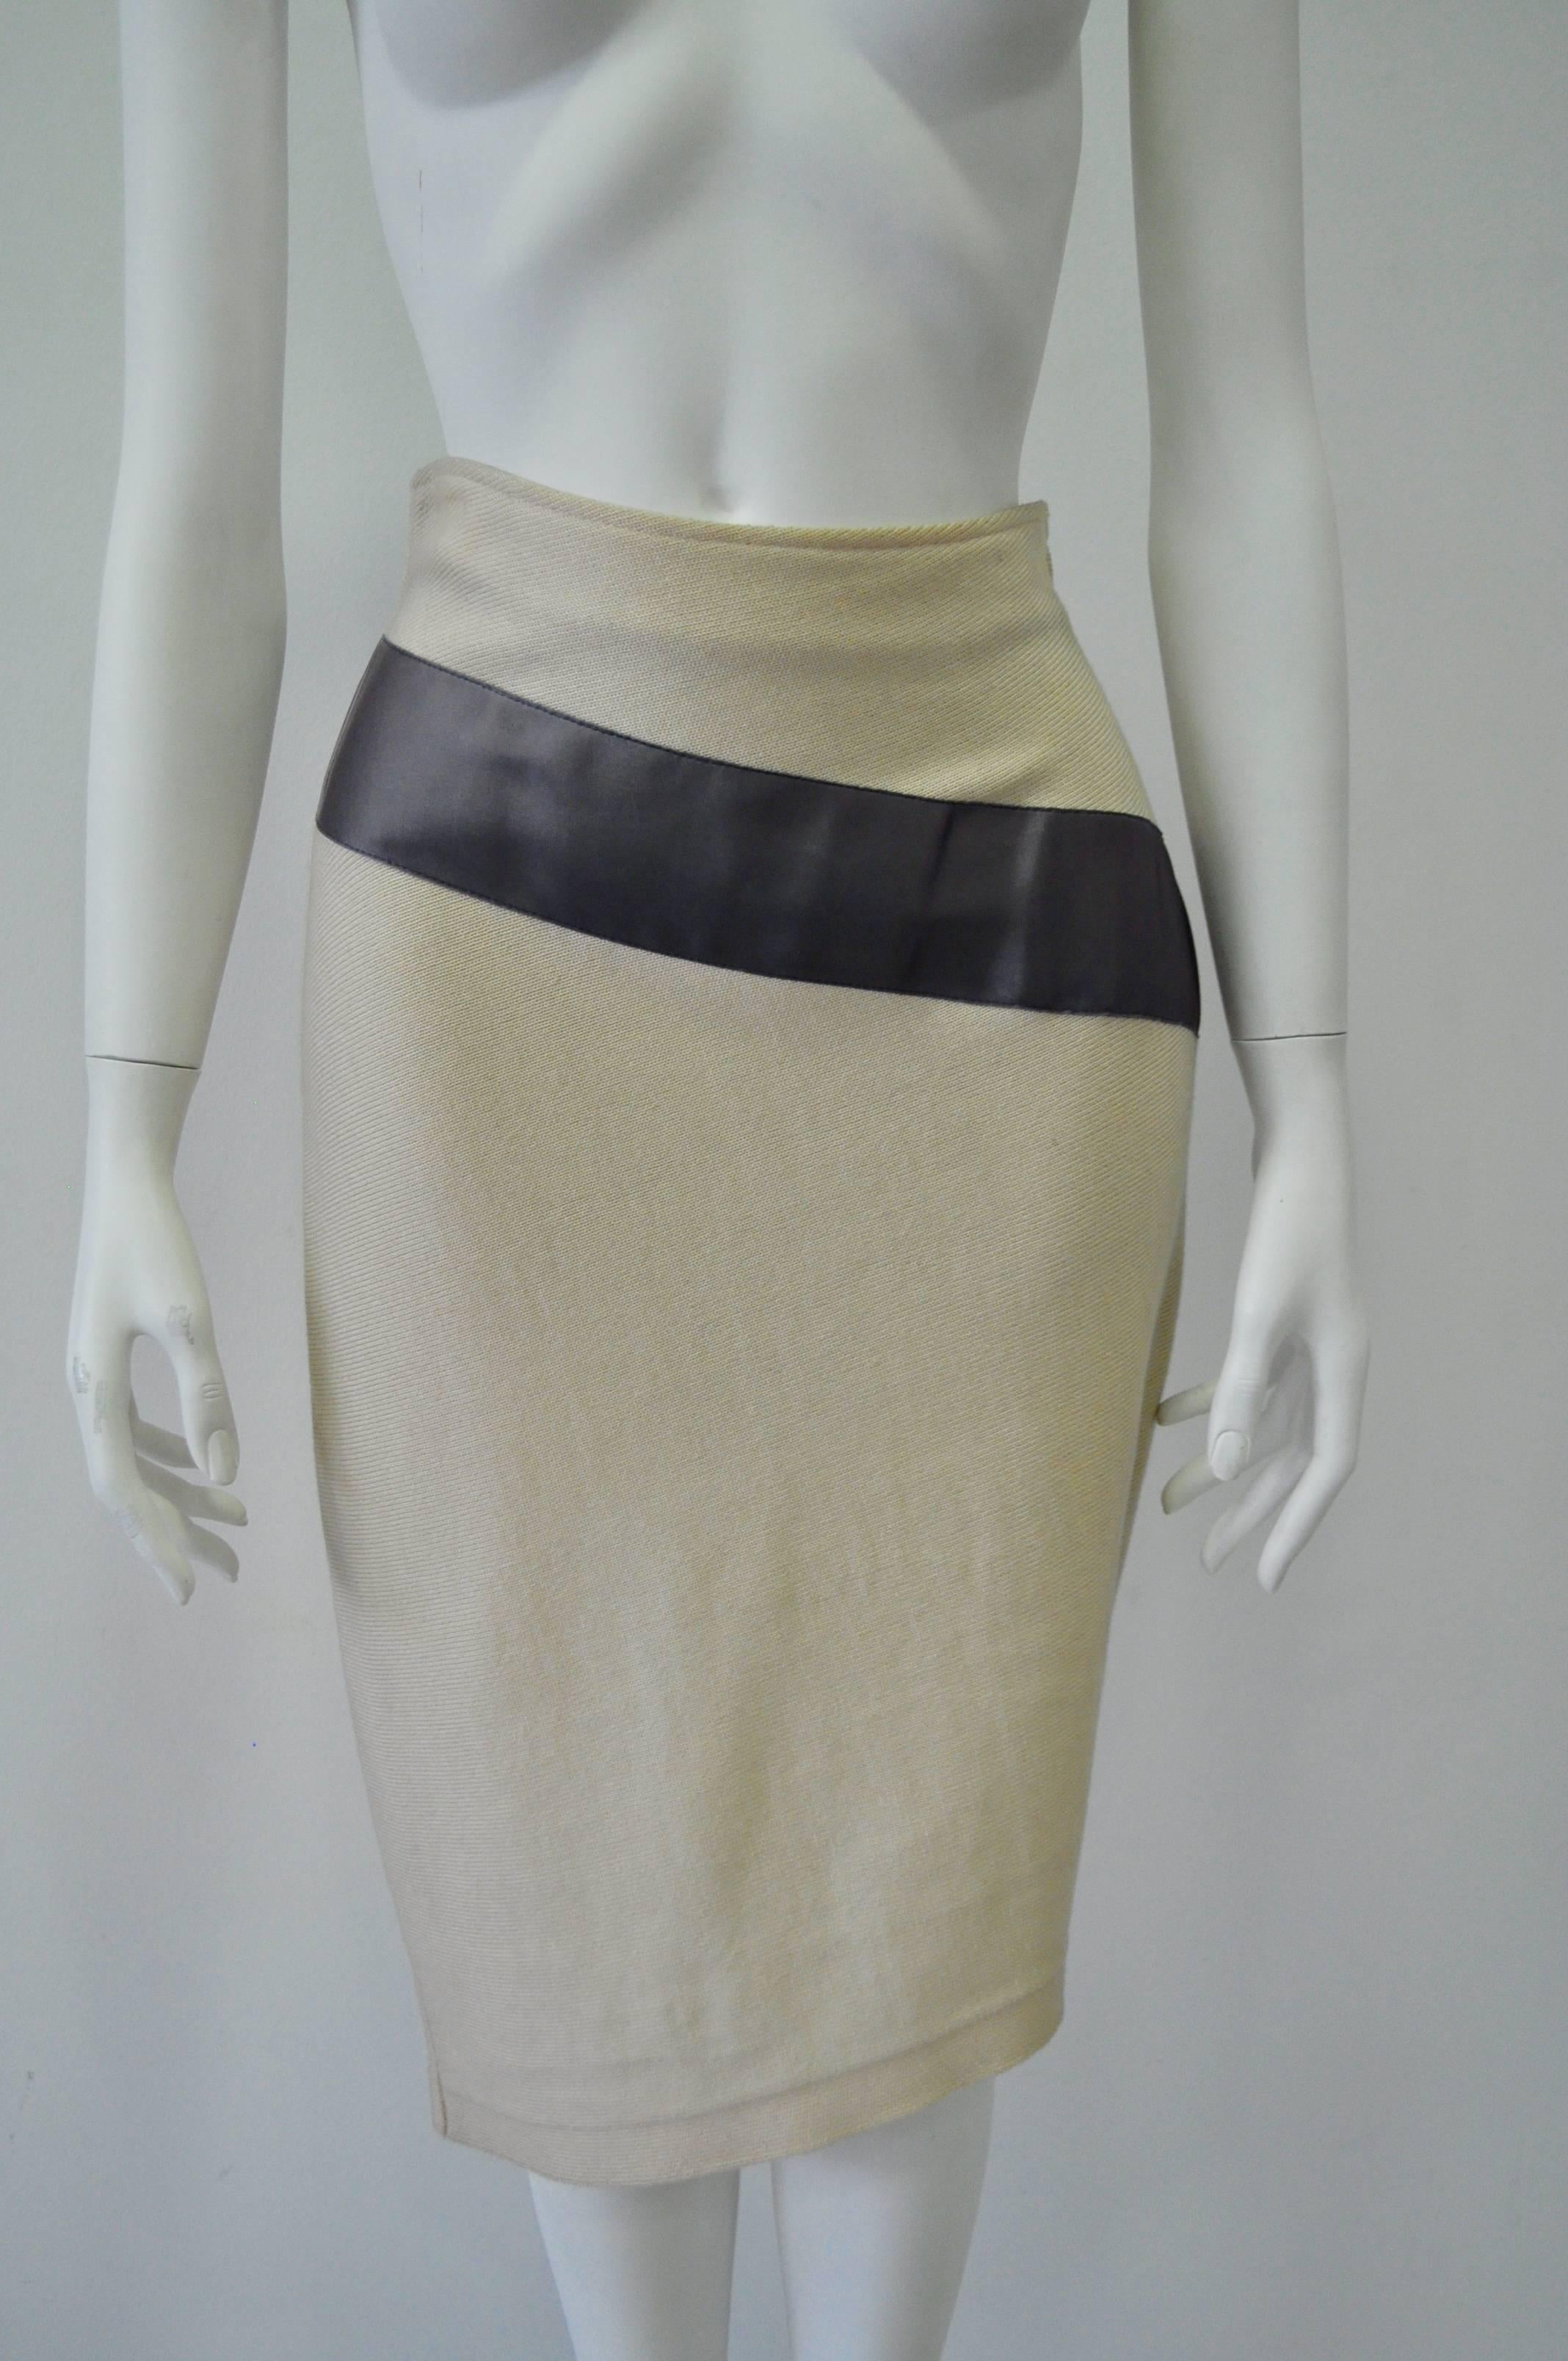 Chic and Unique Gianfranco Ferre Asymmetrical Ecru Knit Pencil Skirt with Contrasting Grey Silk Ribbon Sash